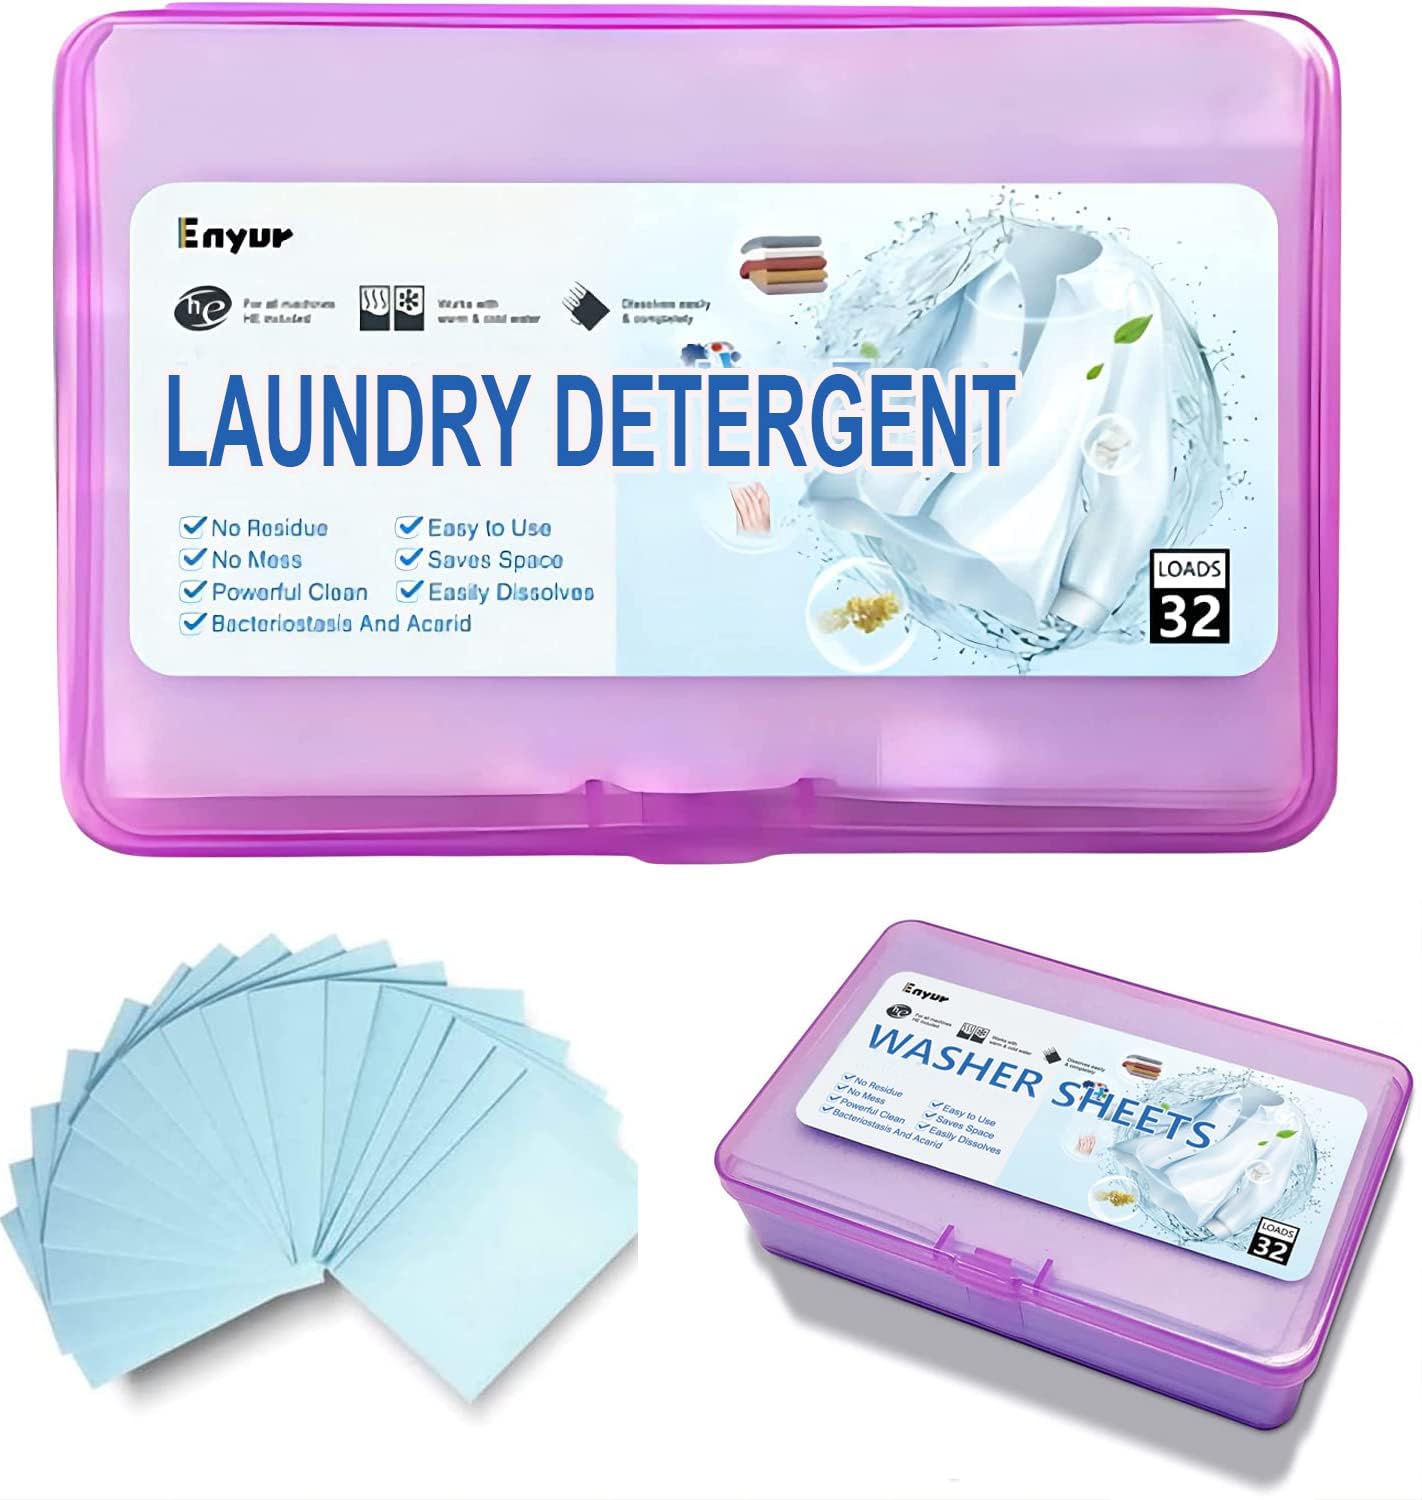 Laundry Detergent Sheets,Travel Laundry Detergent,NO-LEAK Laundry Soap,Liquidless Laundry Sheets,32 Loads,Fresh Scent,Great for College,Camping,Laundromat,HE Machines,Hand Wash